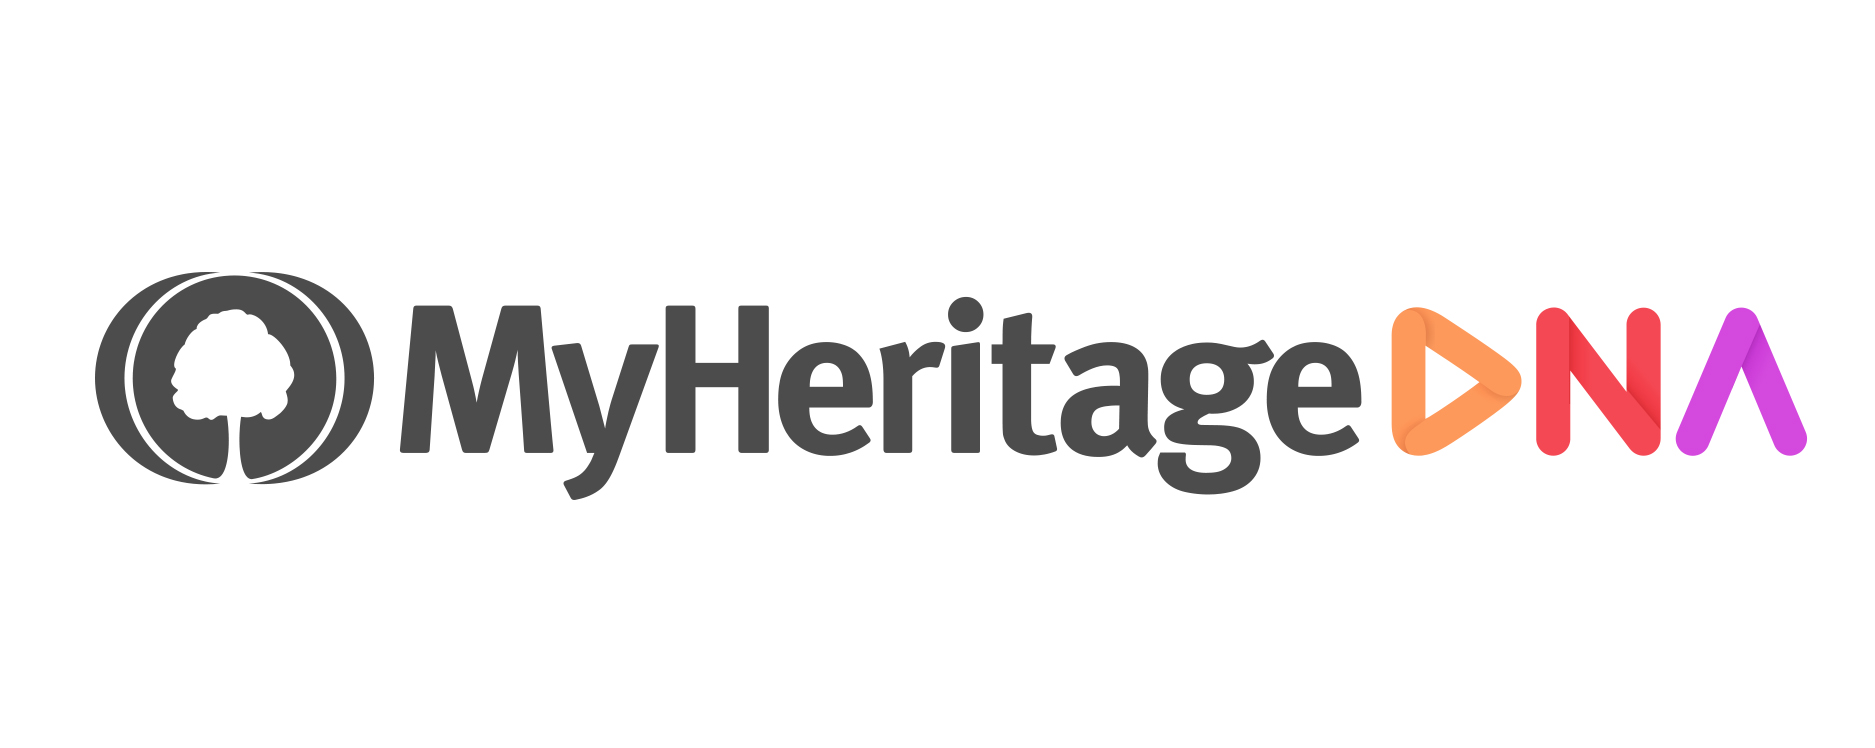 MyHeritage DNA: More than Just Family History